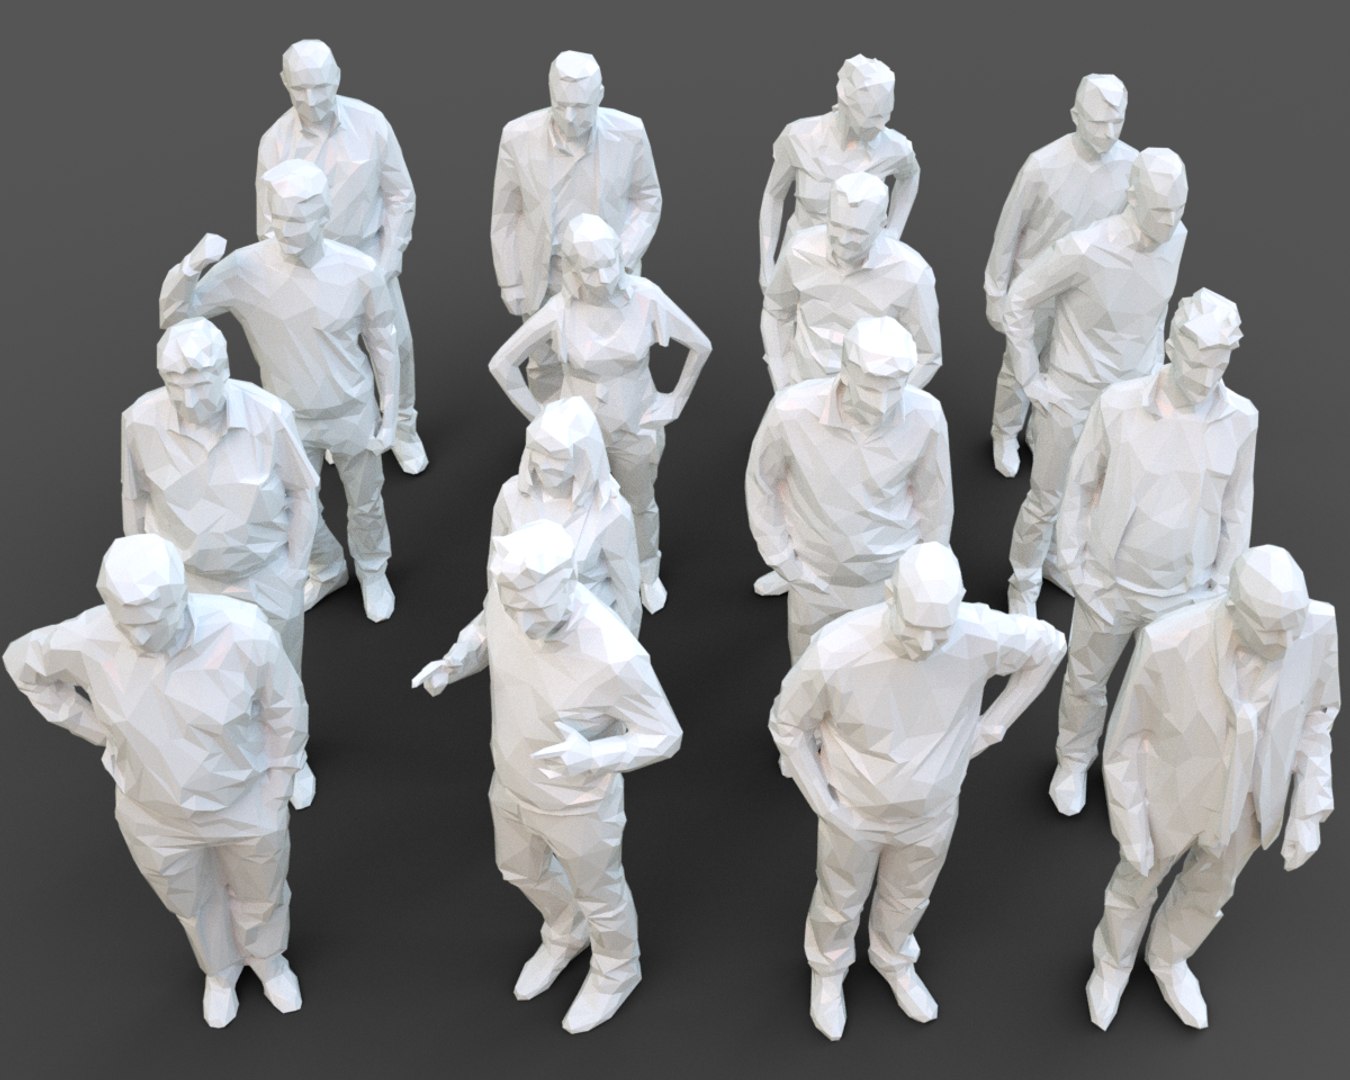 3D Architectural Stylized Human Character Model | 1147650 | TurboSquid